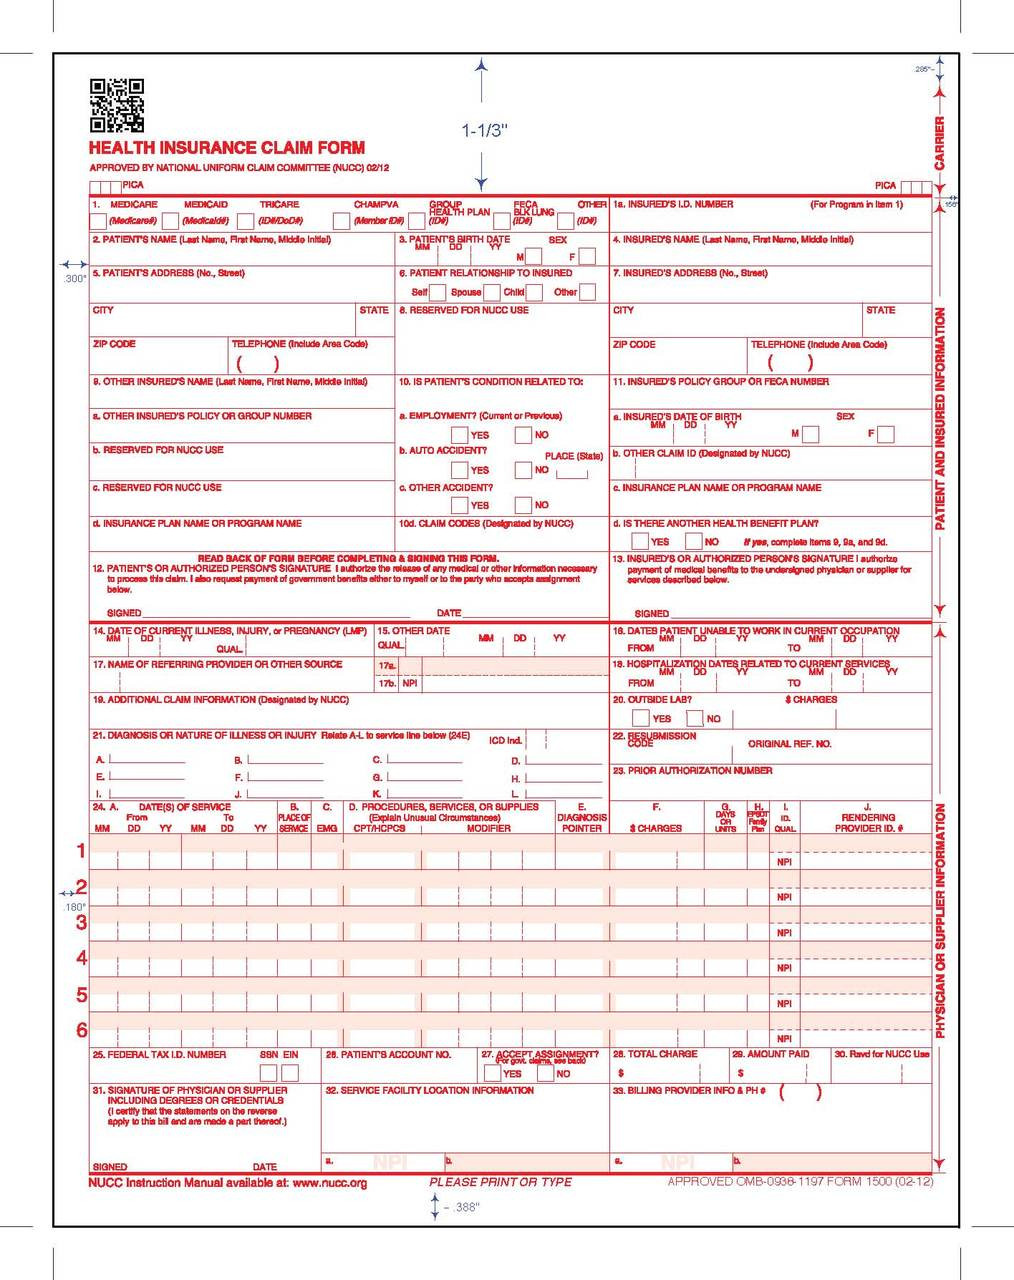 new-cms-1500-02-12-claim-form-replaces-previous-version-08-05